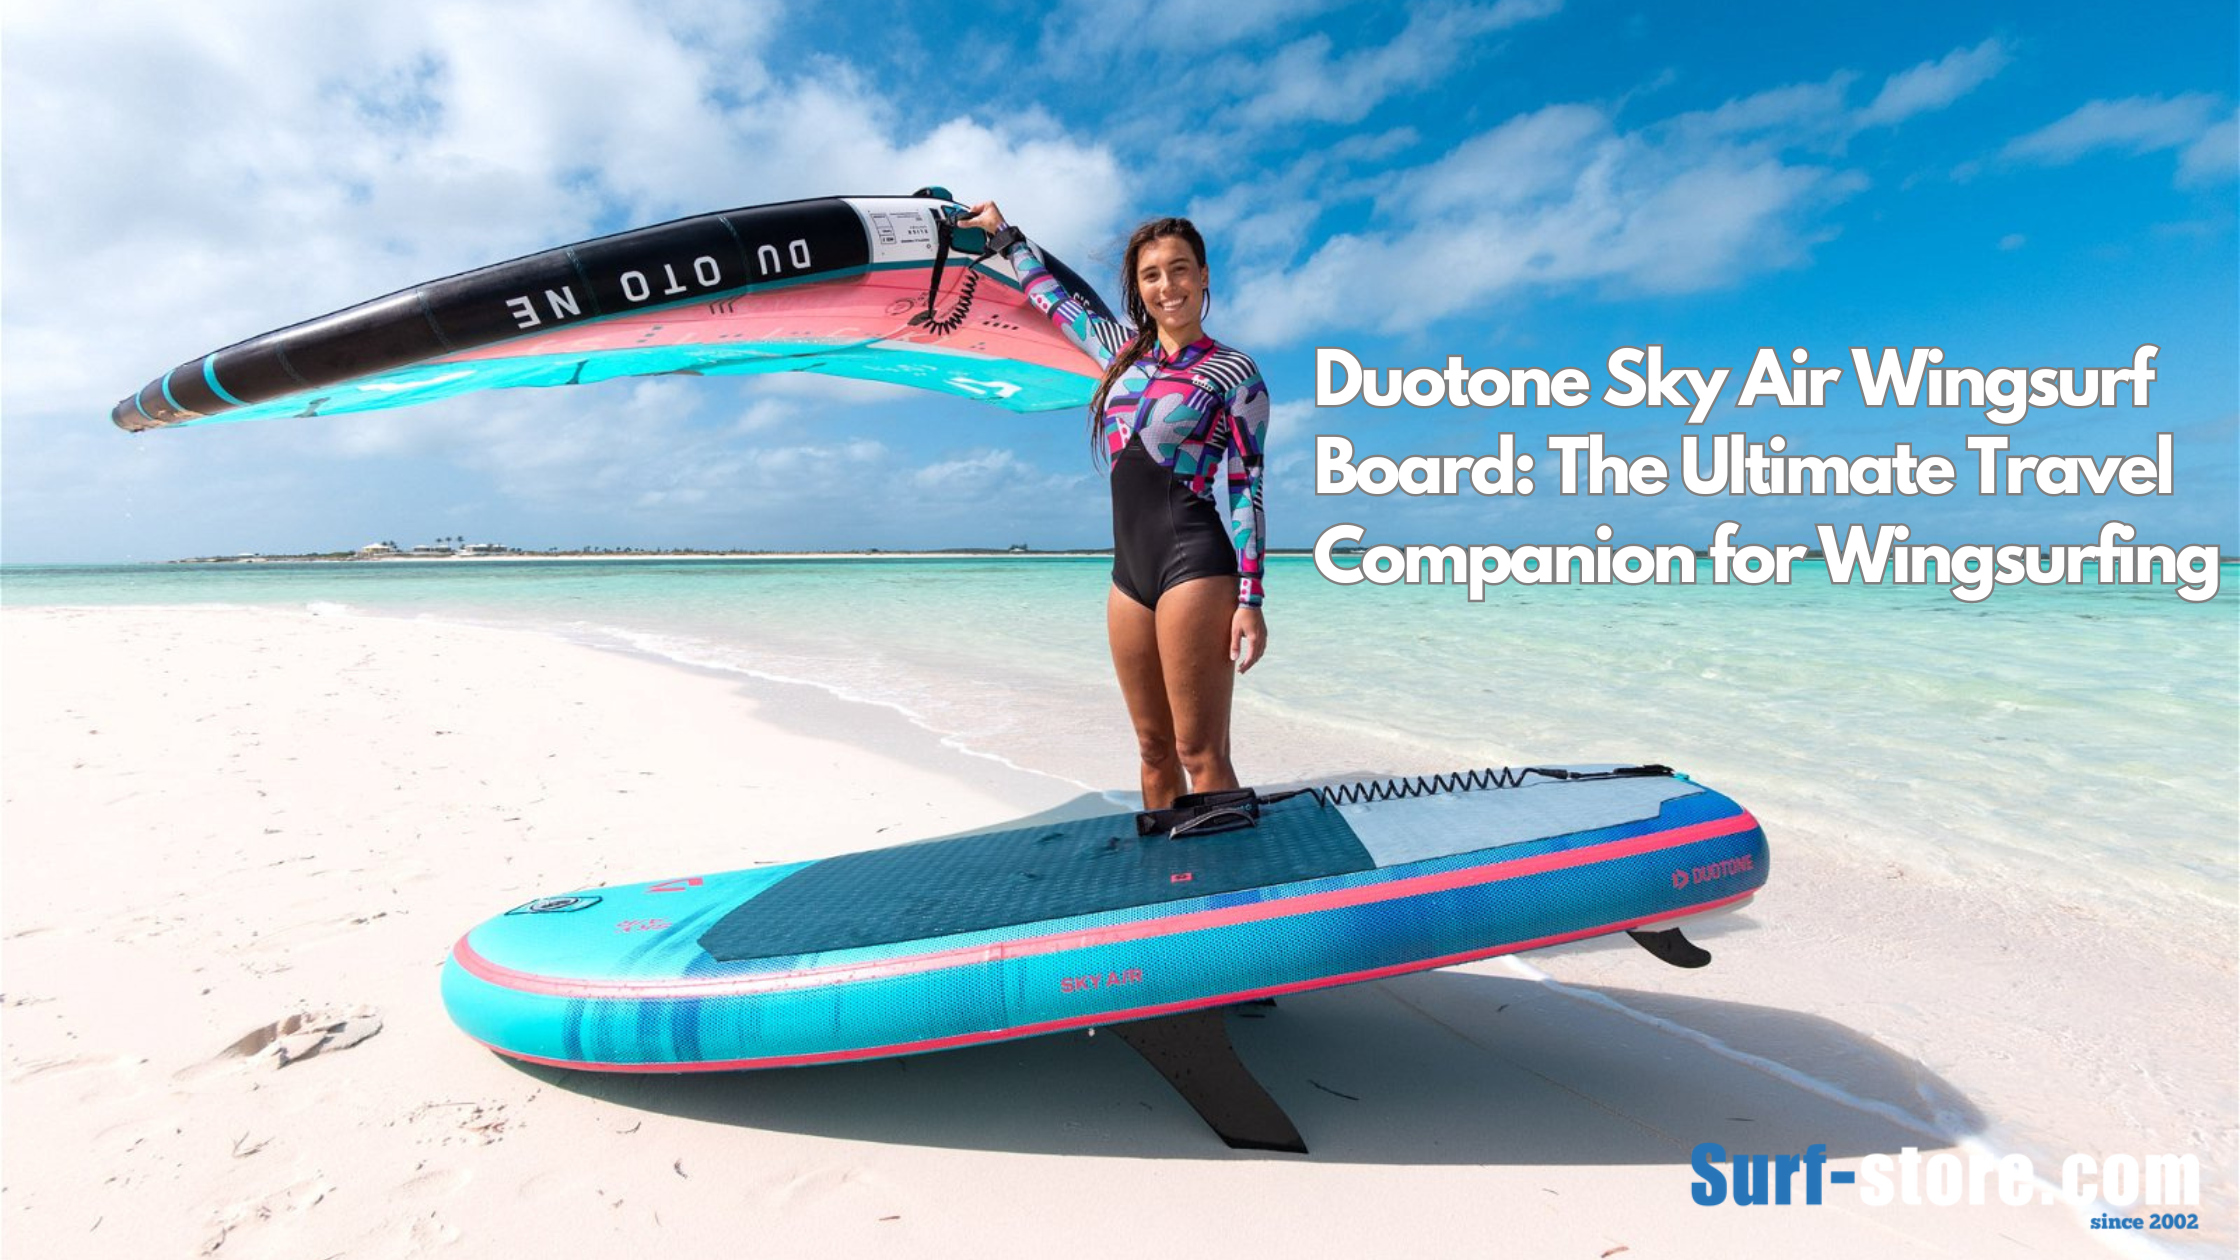 Duotone Sky Air Wingsurf Board in action, showcasing its sleek design and travel-ready features.